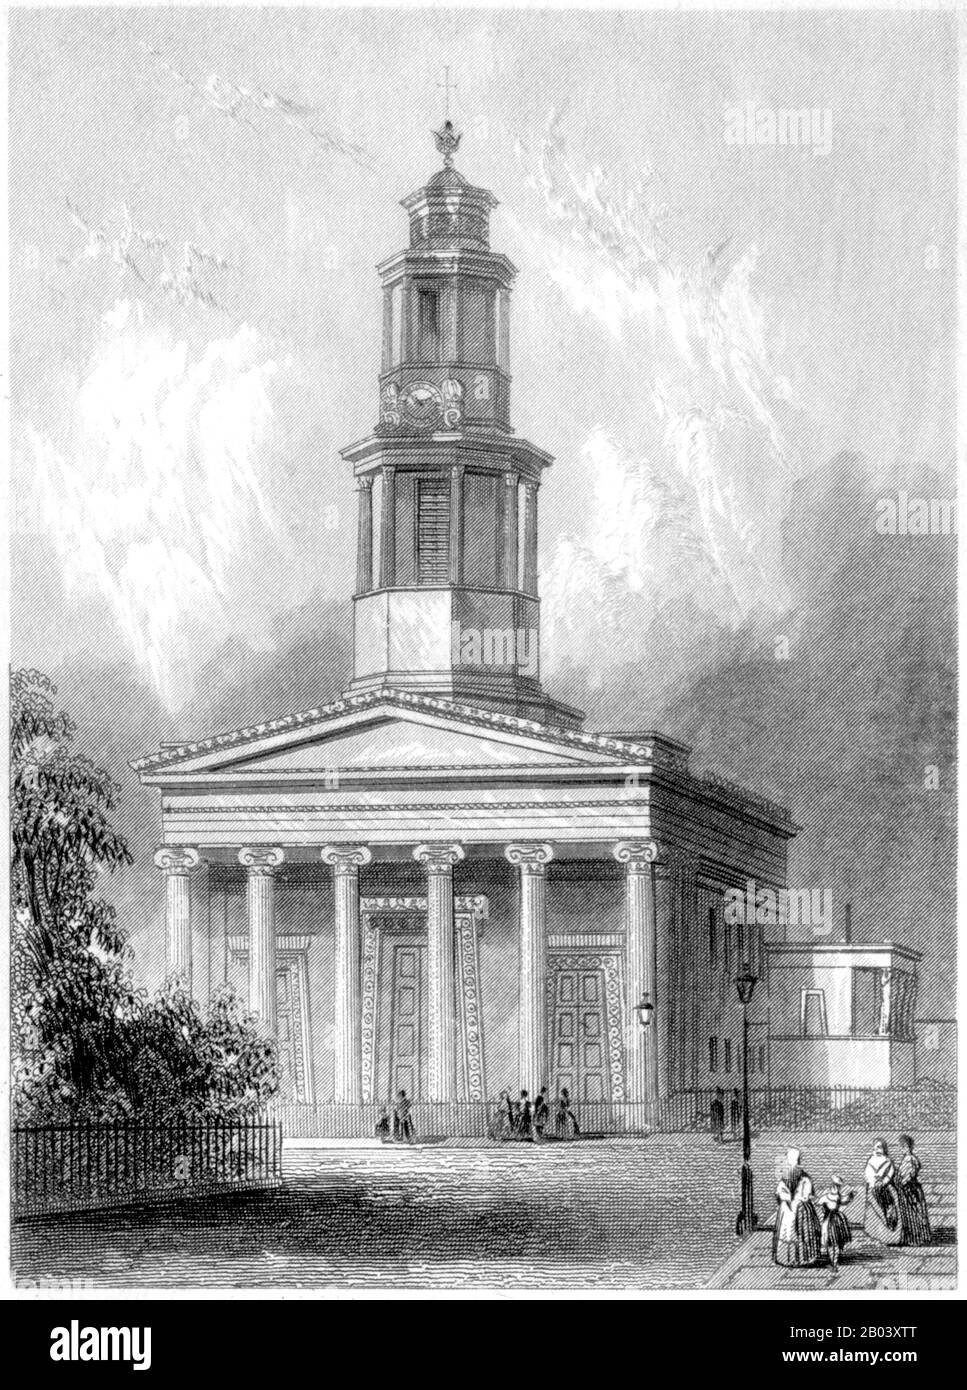 Engraving of St Pancras New Church, London scanned at high resolution from a book printed in 1851. This image is believed to be free of all copyright. Stock Photo